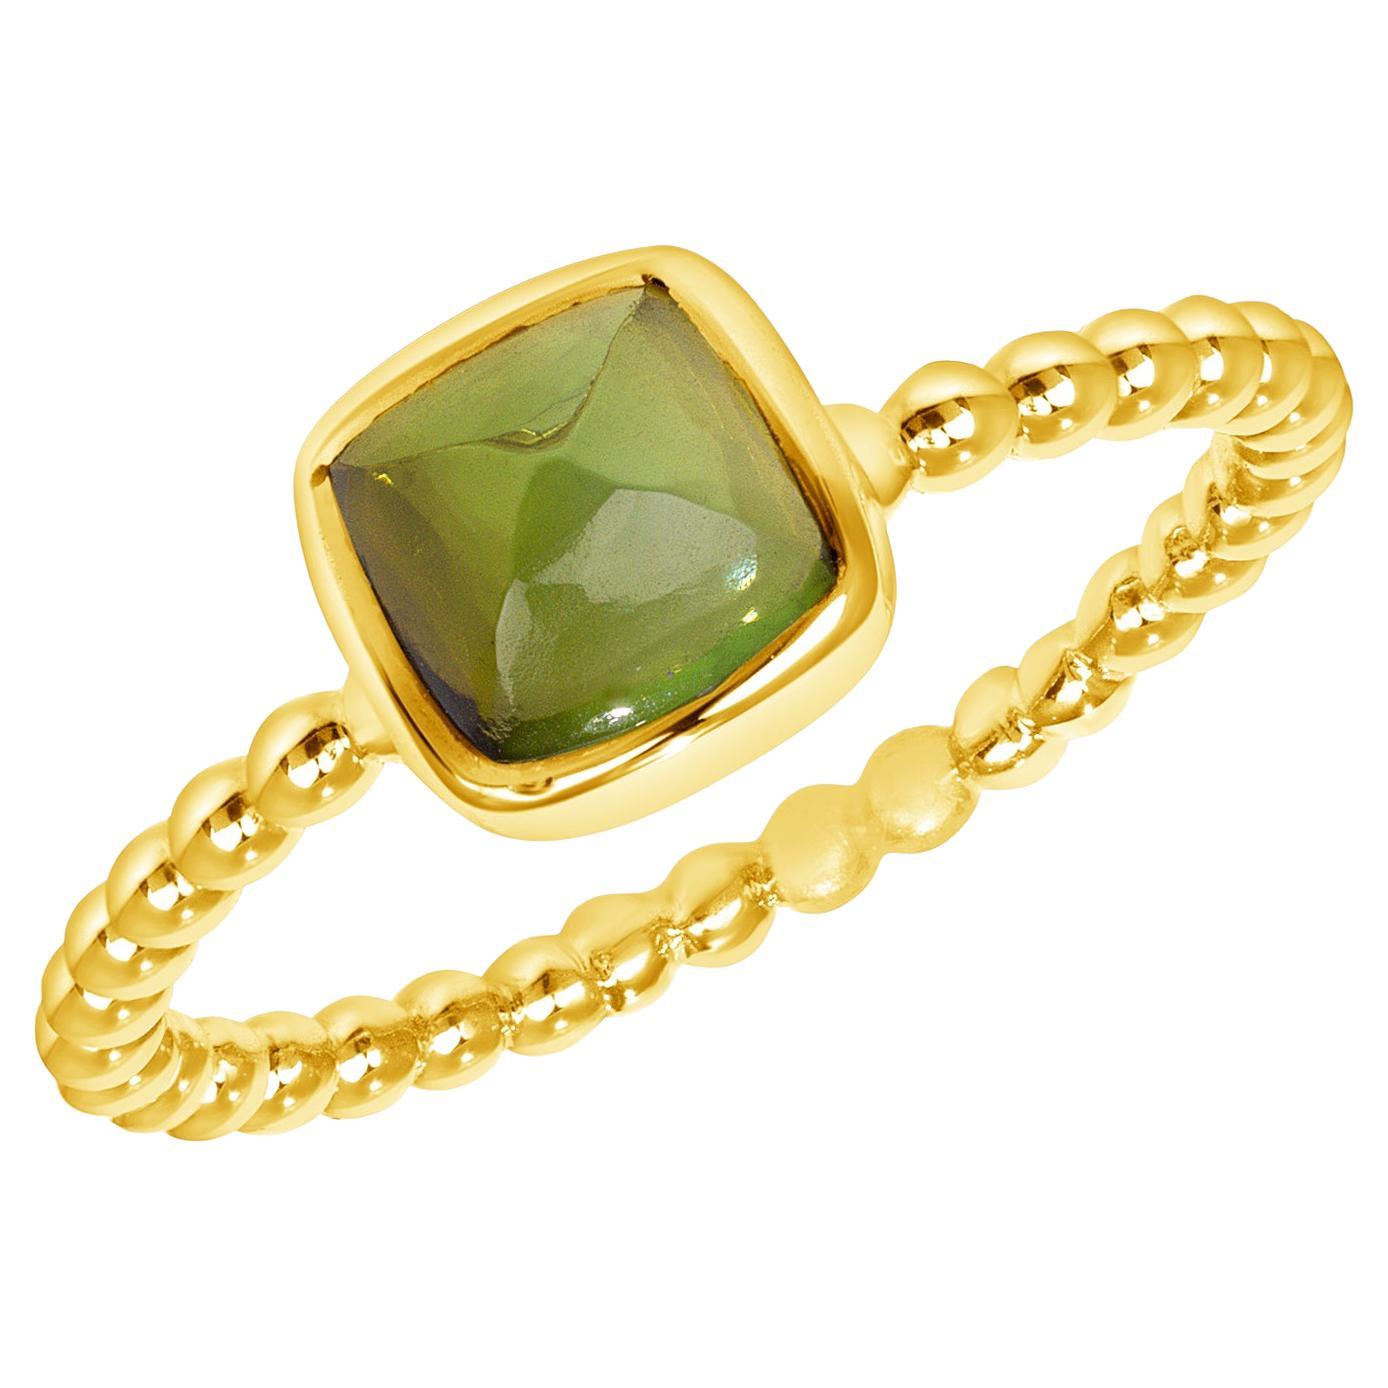 1.12 Carat Green Sugarloaf Tourmaline in Yellow Gold, in Stock For Sale